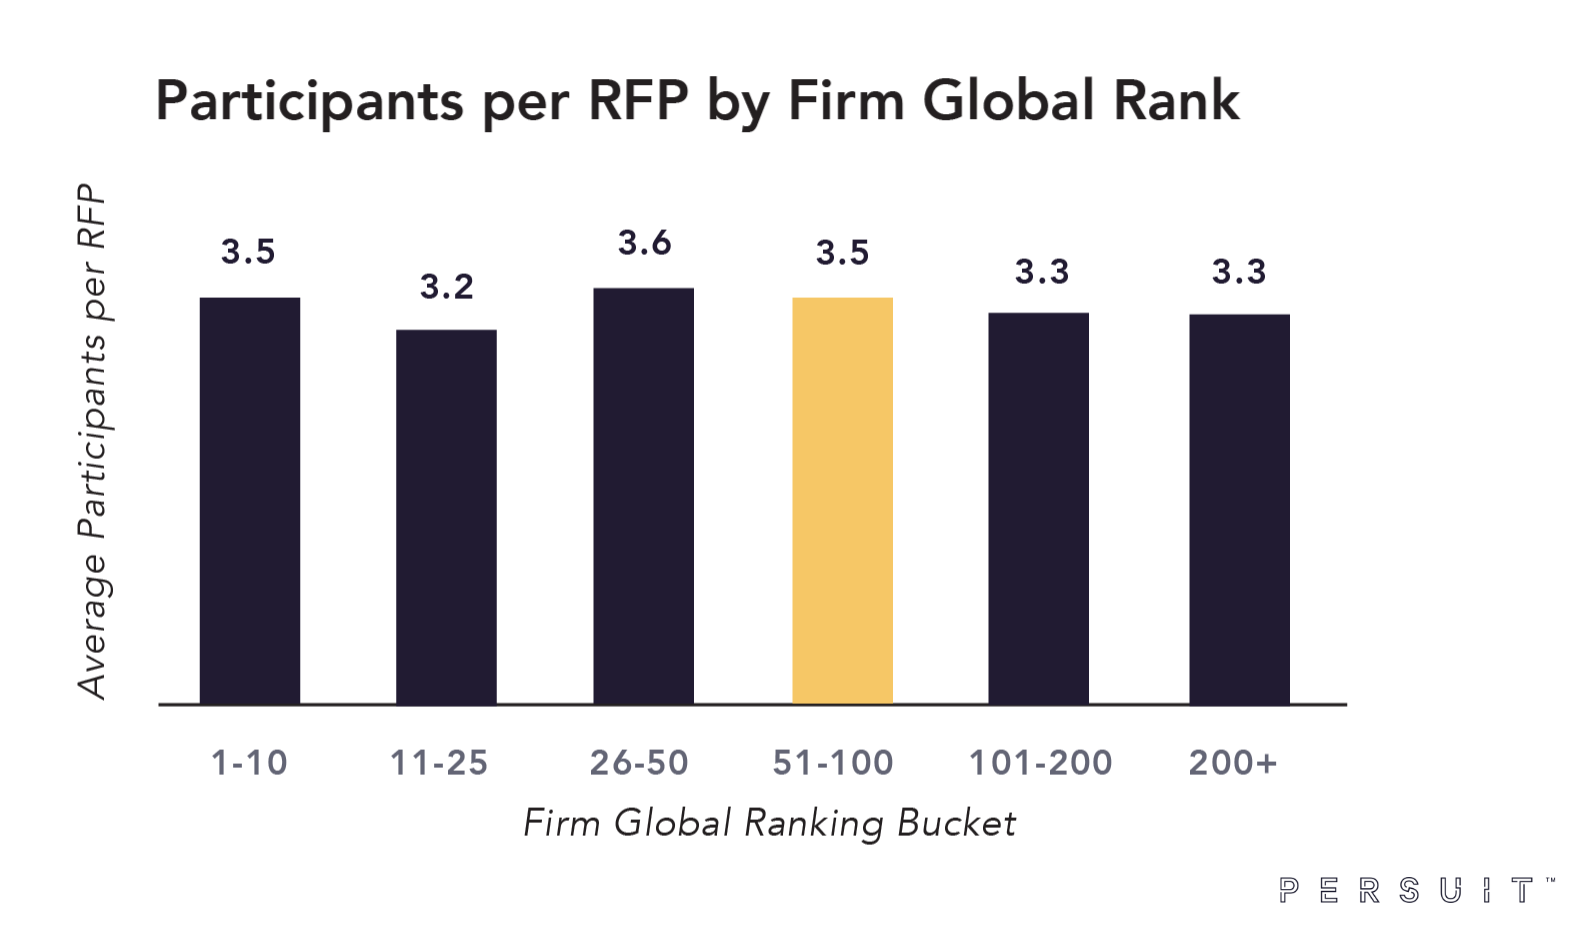 Participants per RFP by Firm Global Rank